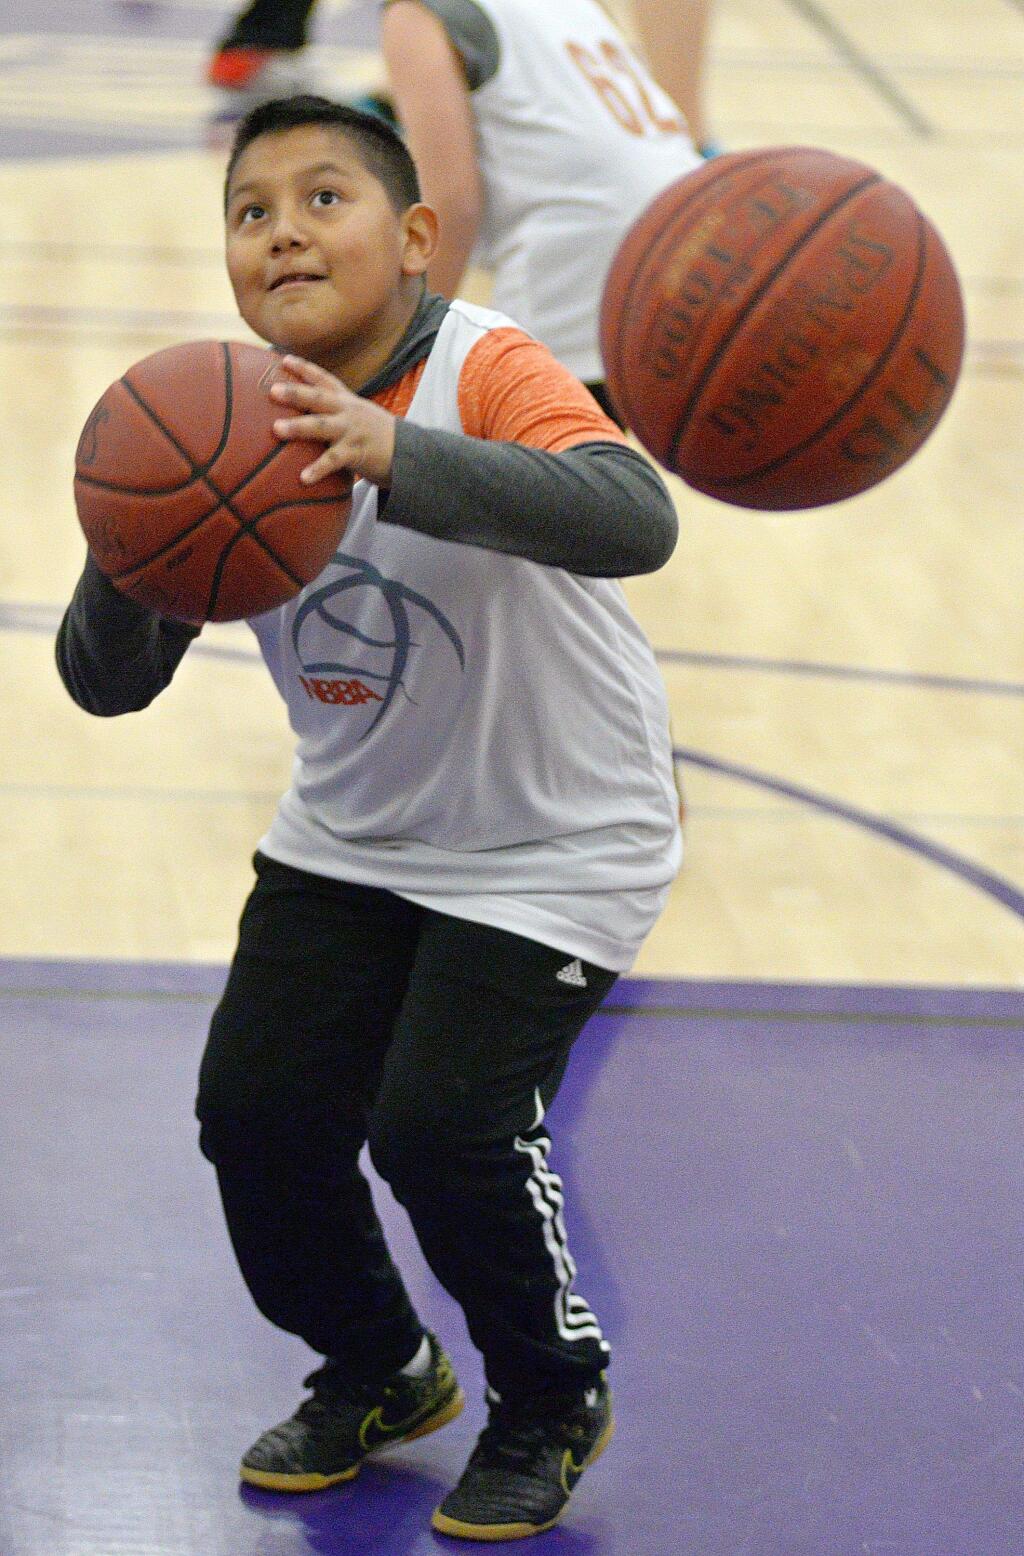 Incoming balls couldn't distract this shooter in warmups for a game in the Petaluma Basketball Jamboree for elementary schools sponsored by the Petaluma City Schools After Schools Activities Program and the Northbay Basketball Academy.(SUMNER FOWLER/FOR THE ARGUS-COURIER)